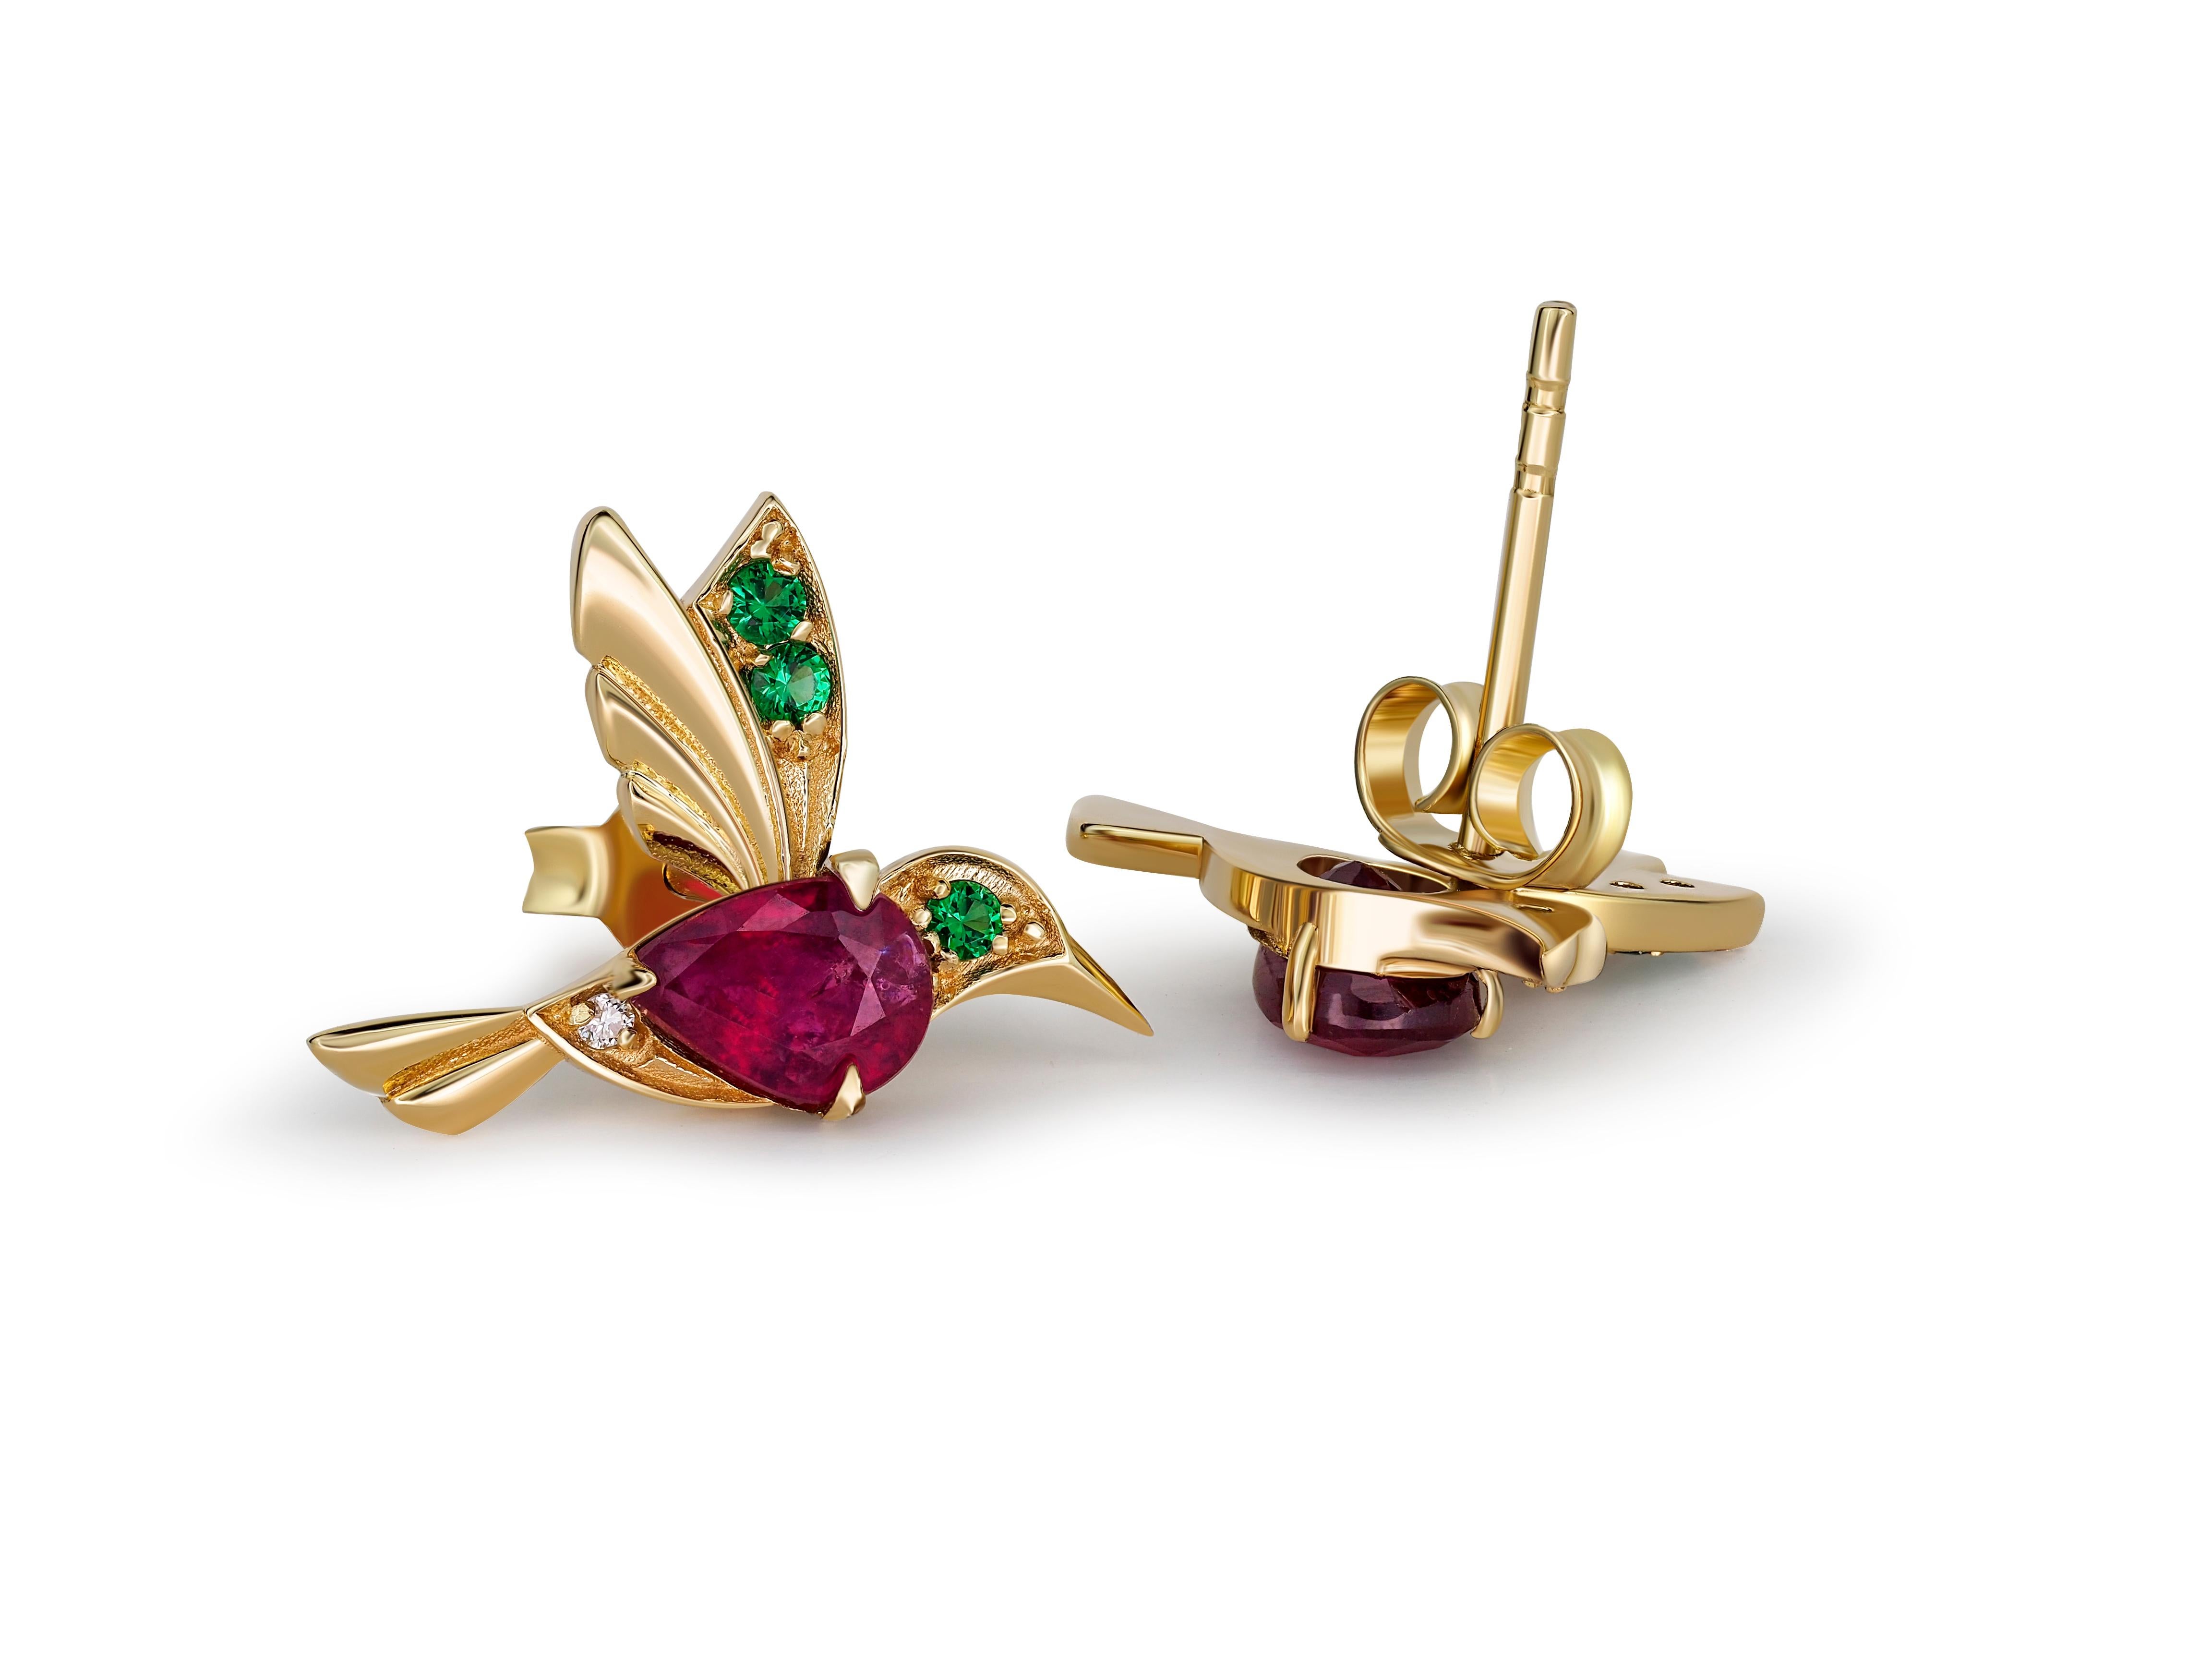 Pear Cut 14k Gold Hummingbird Earings Studs with Rubies, Bird Stud Earrings with Gems ! For Sale